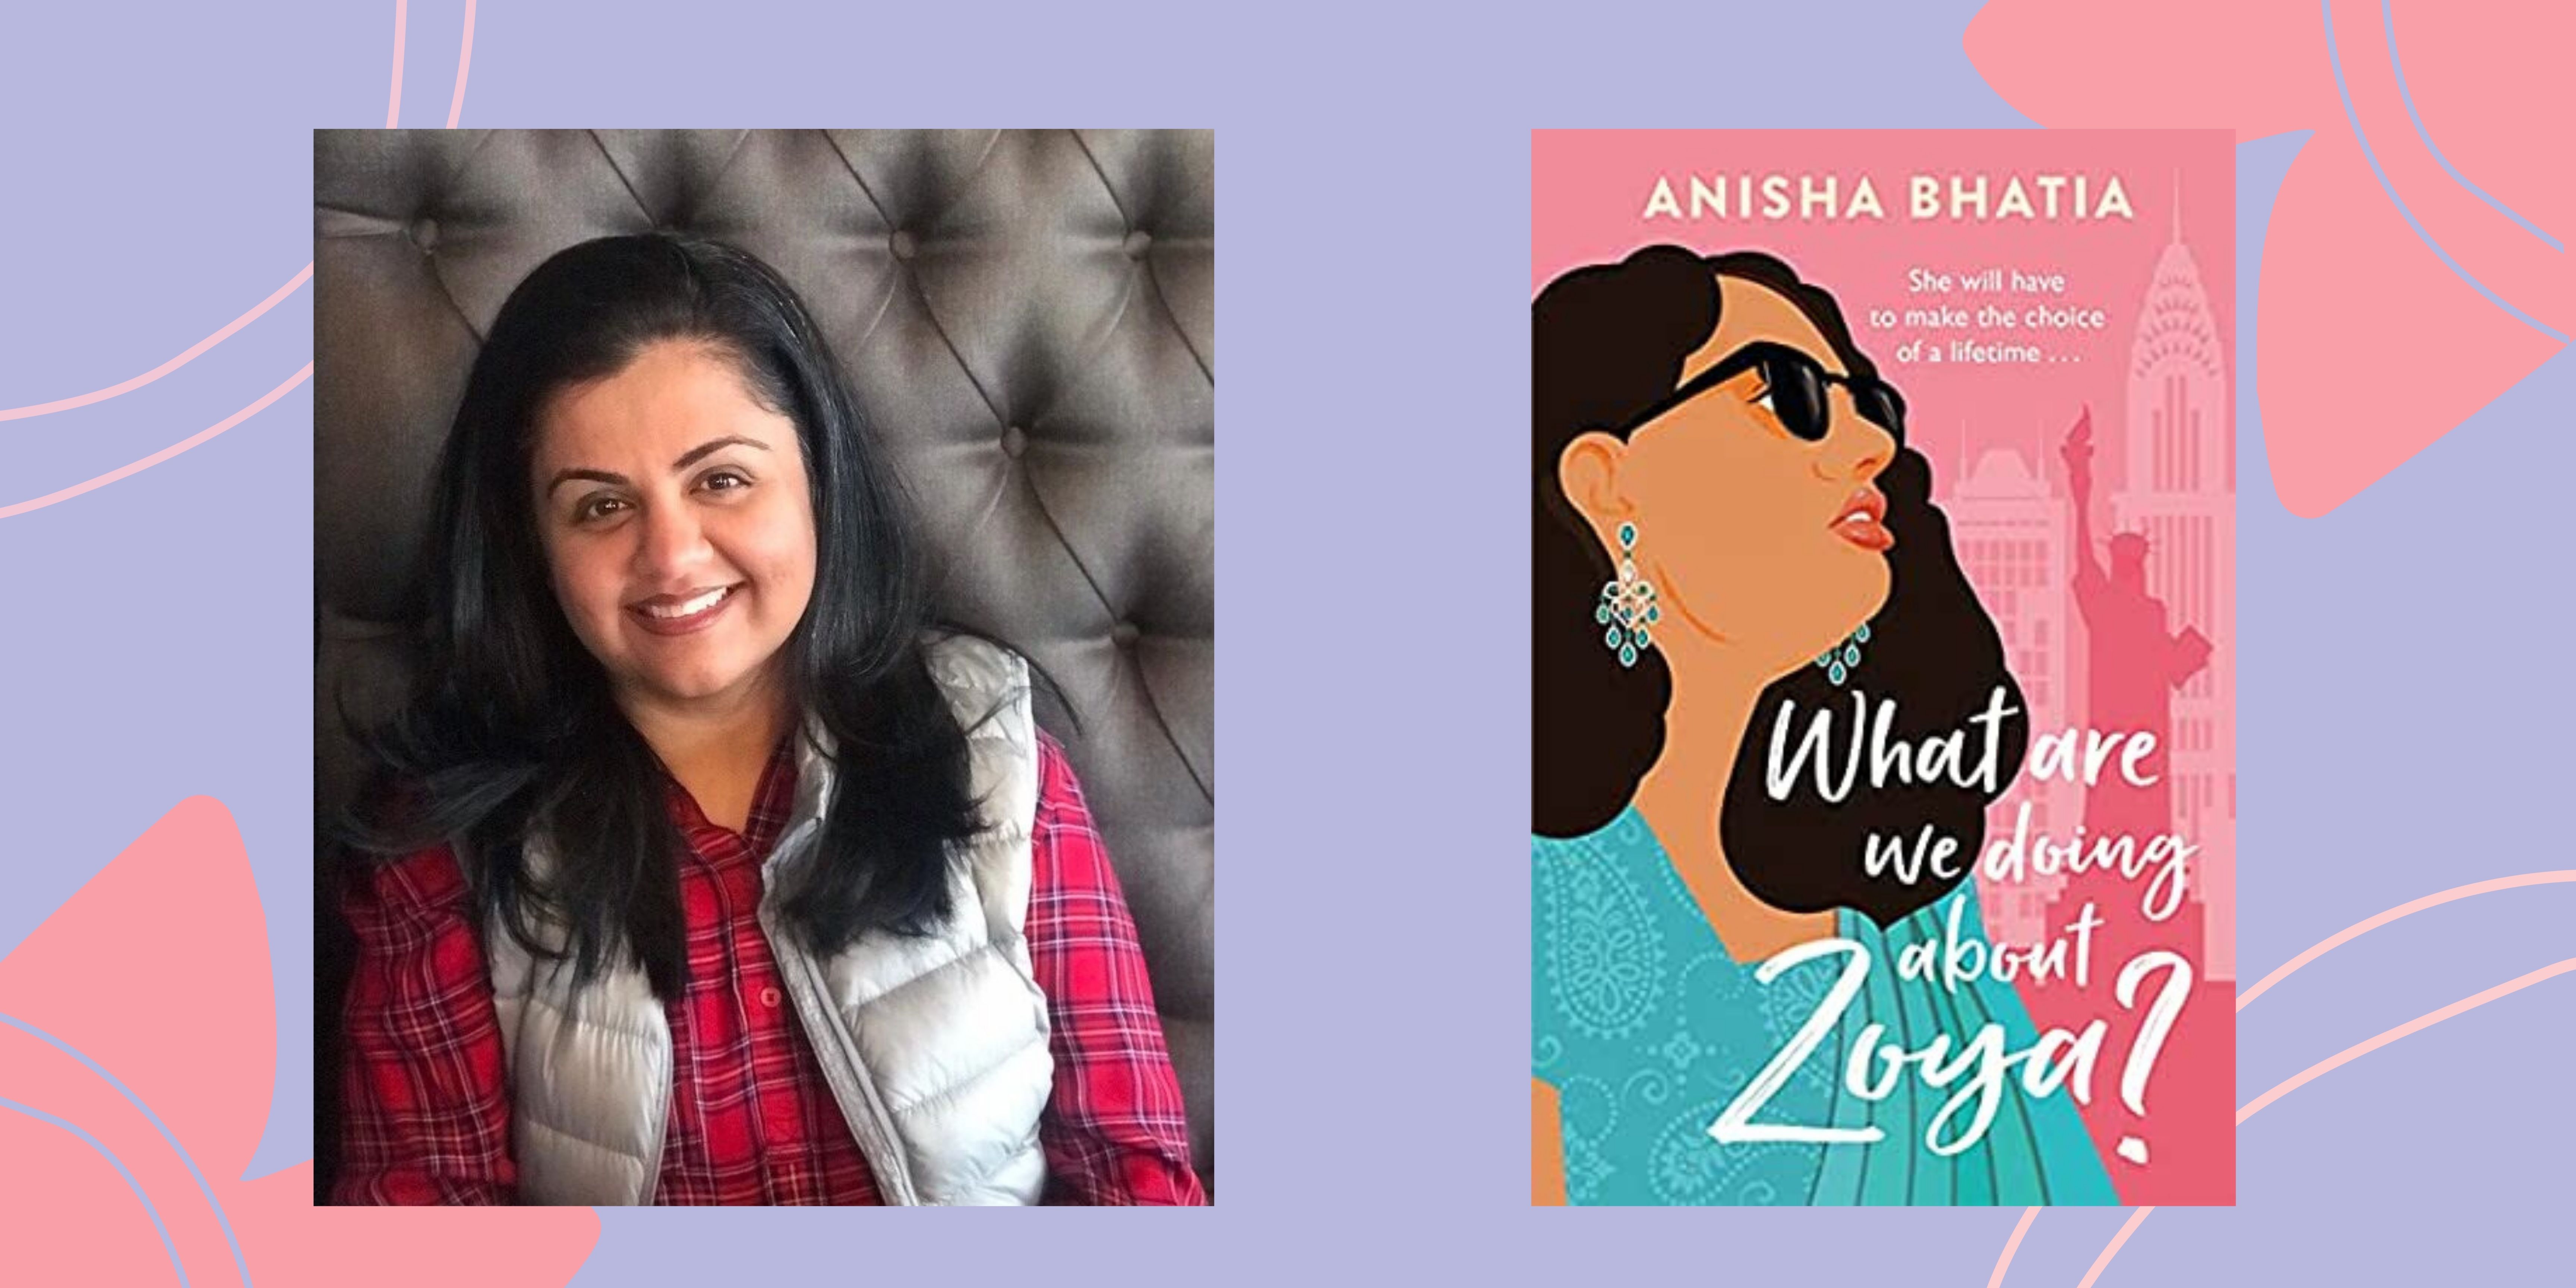 Interview with Anisha Bhatia, author of What are we doing about Zoya?